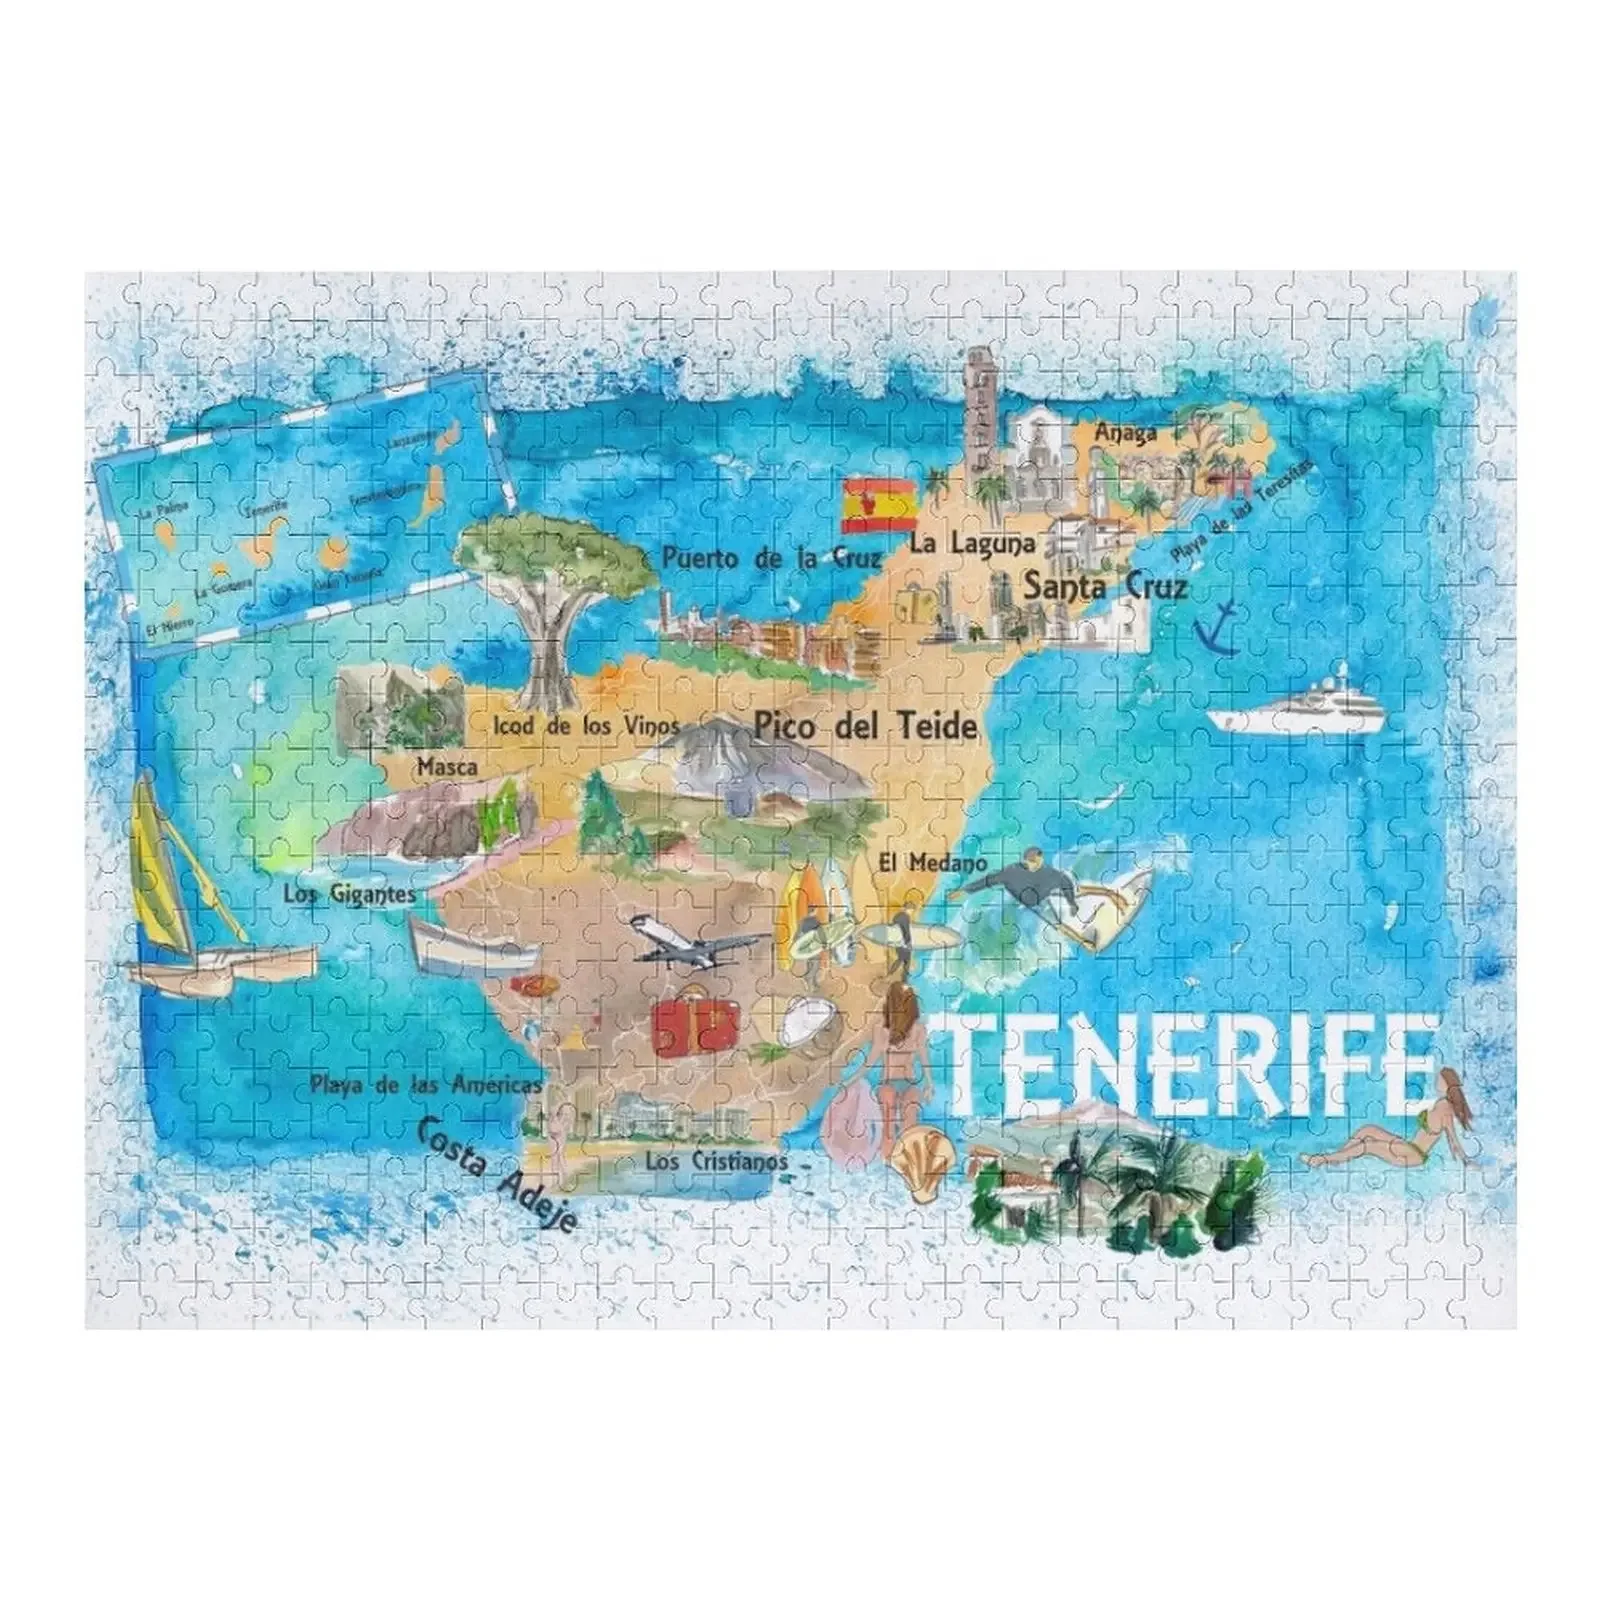 Tenerife Canarias Spain Illustrated Map with Landmarks and Highlights Jigsaw Puzzle Wooden Adults Personalized Name Puzzle 1pc j284b l shaped high hardness 775 dc motor base fixed support with 2 screws all metal holder sell at a loss france spain